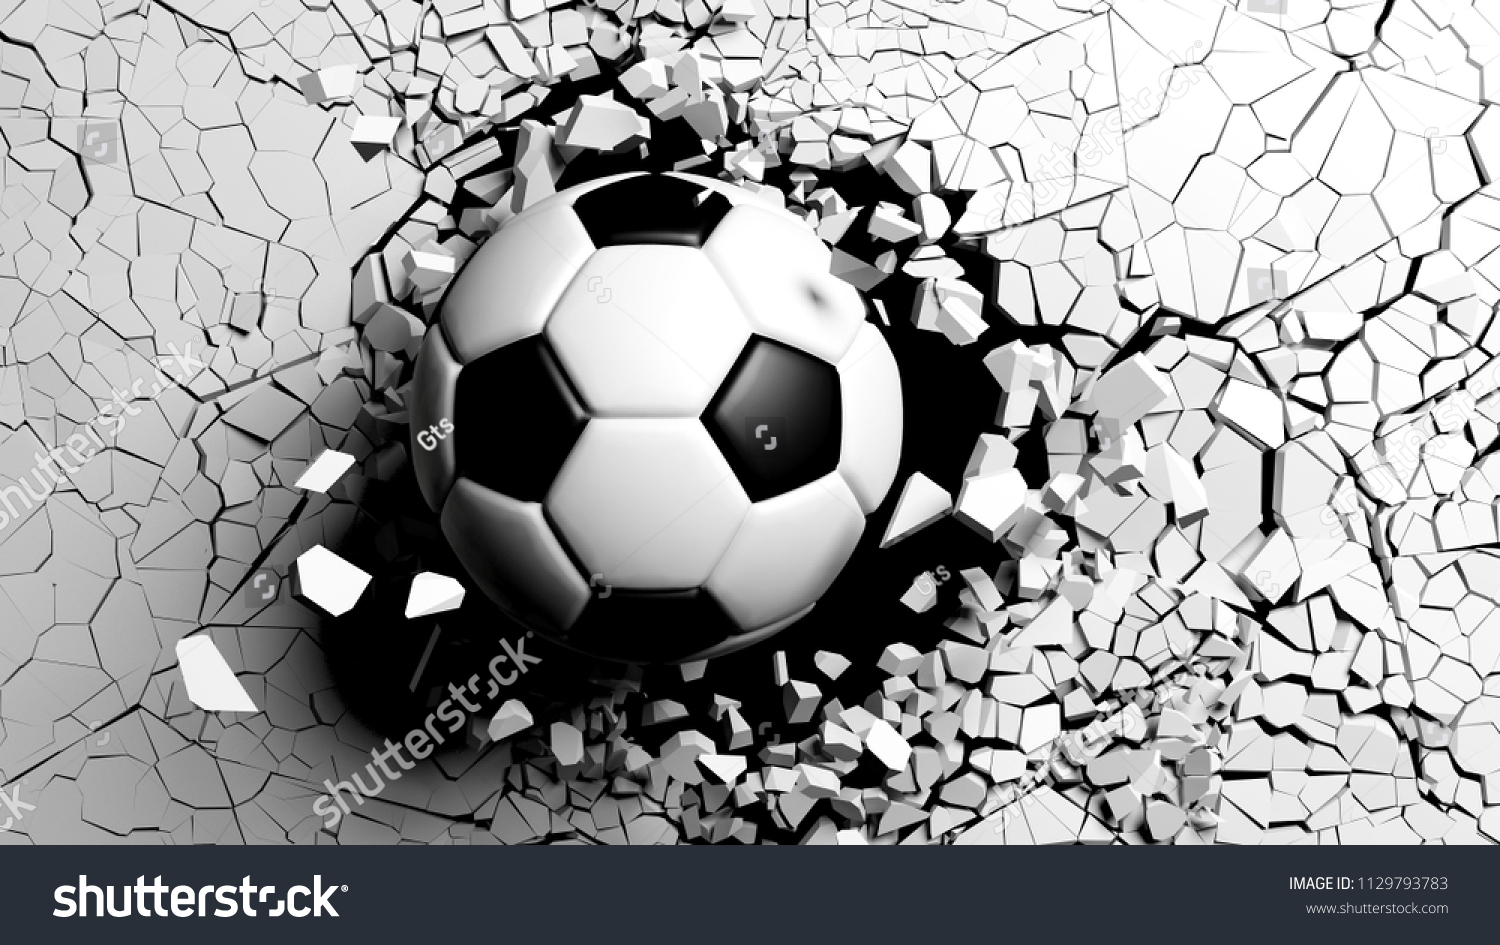 Soccer ball breaking with great force wallpaper mural